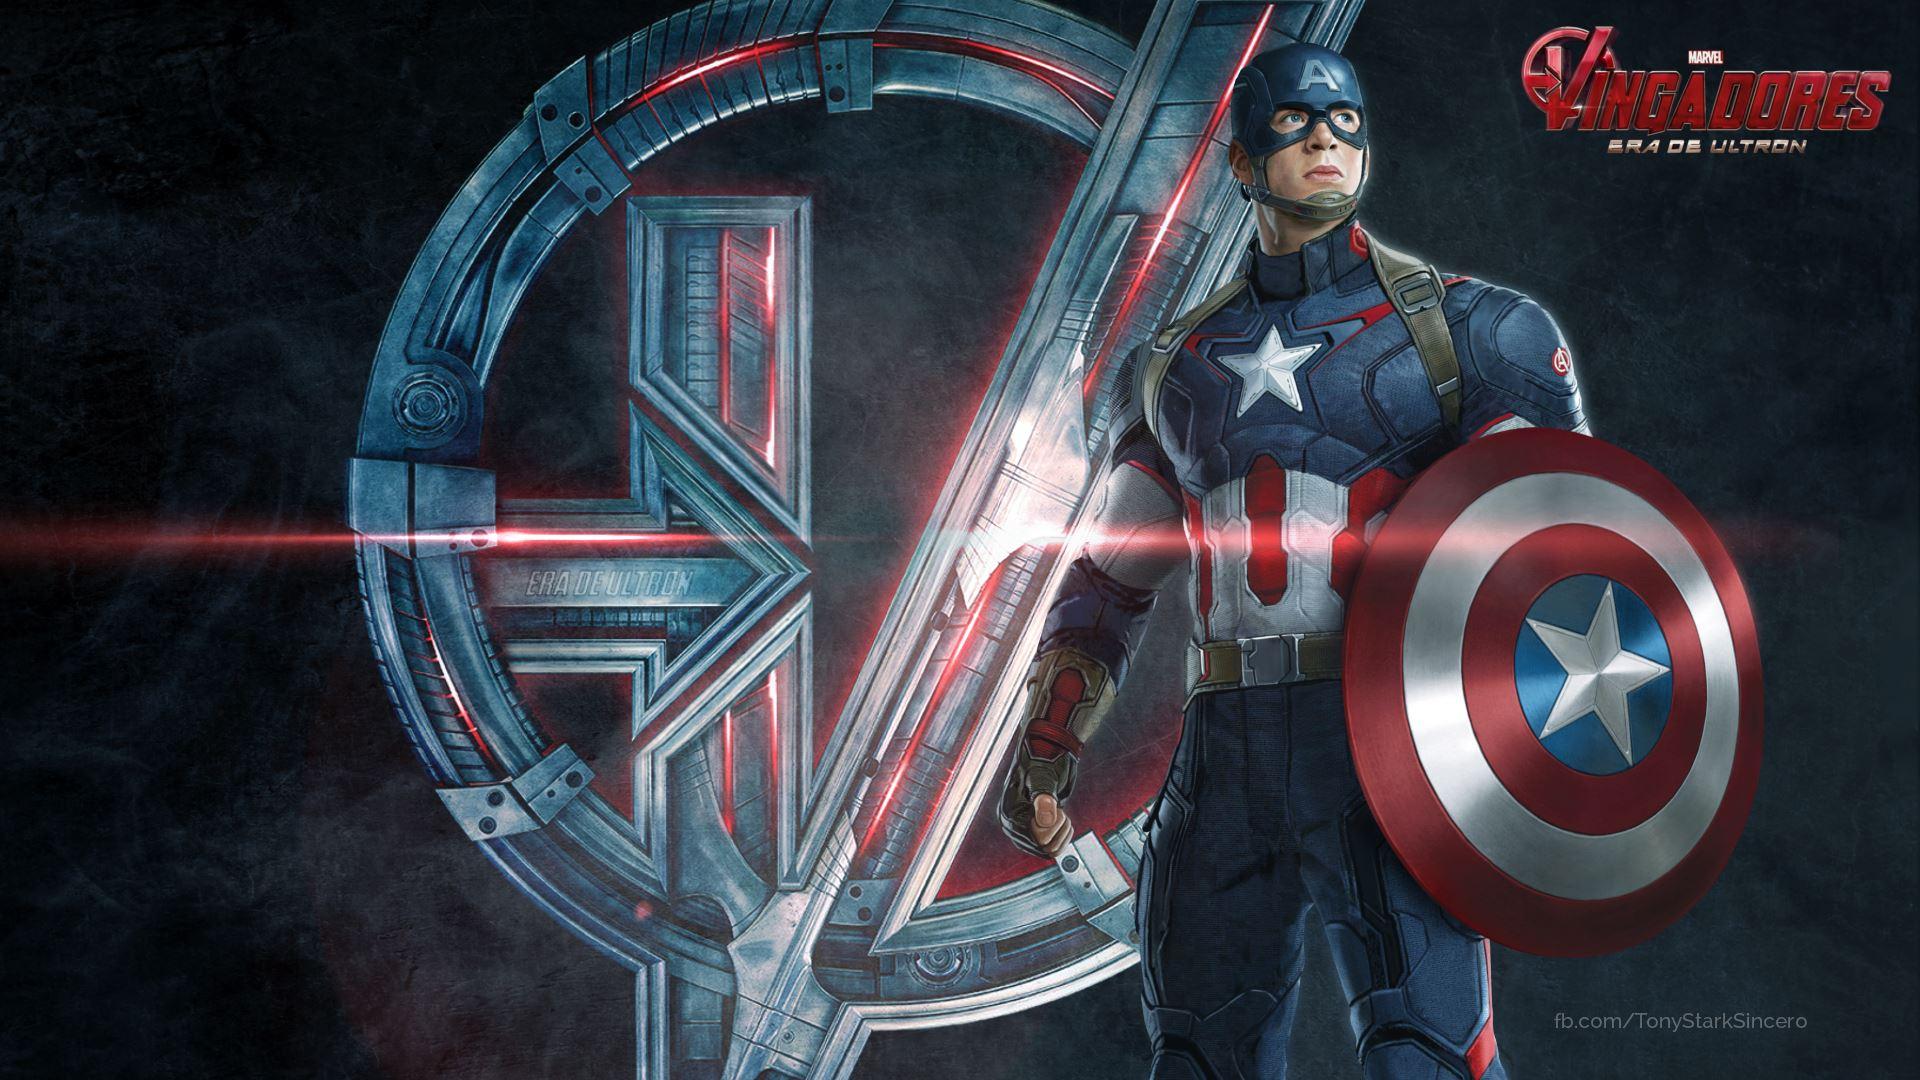 Check Out These Awesome 'Avengers: Age of Ultron' Character